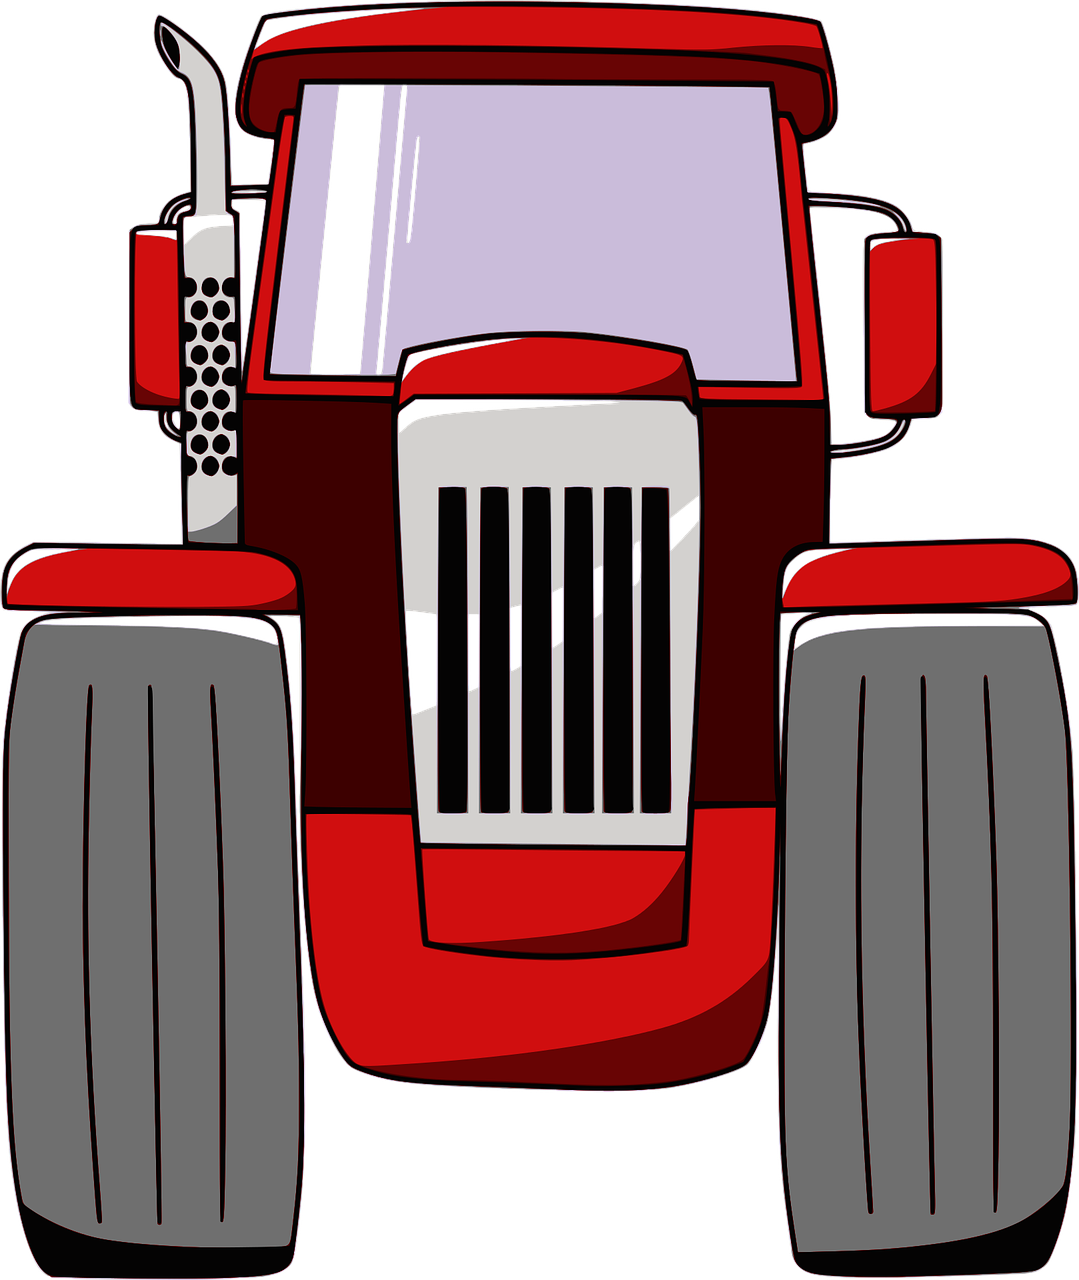 Red Farm Tractor Illustration PNG image